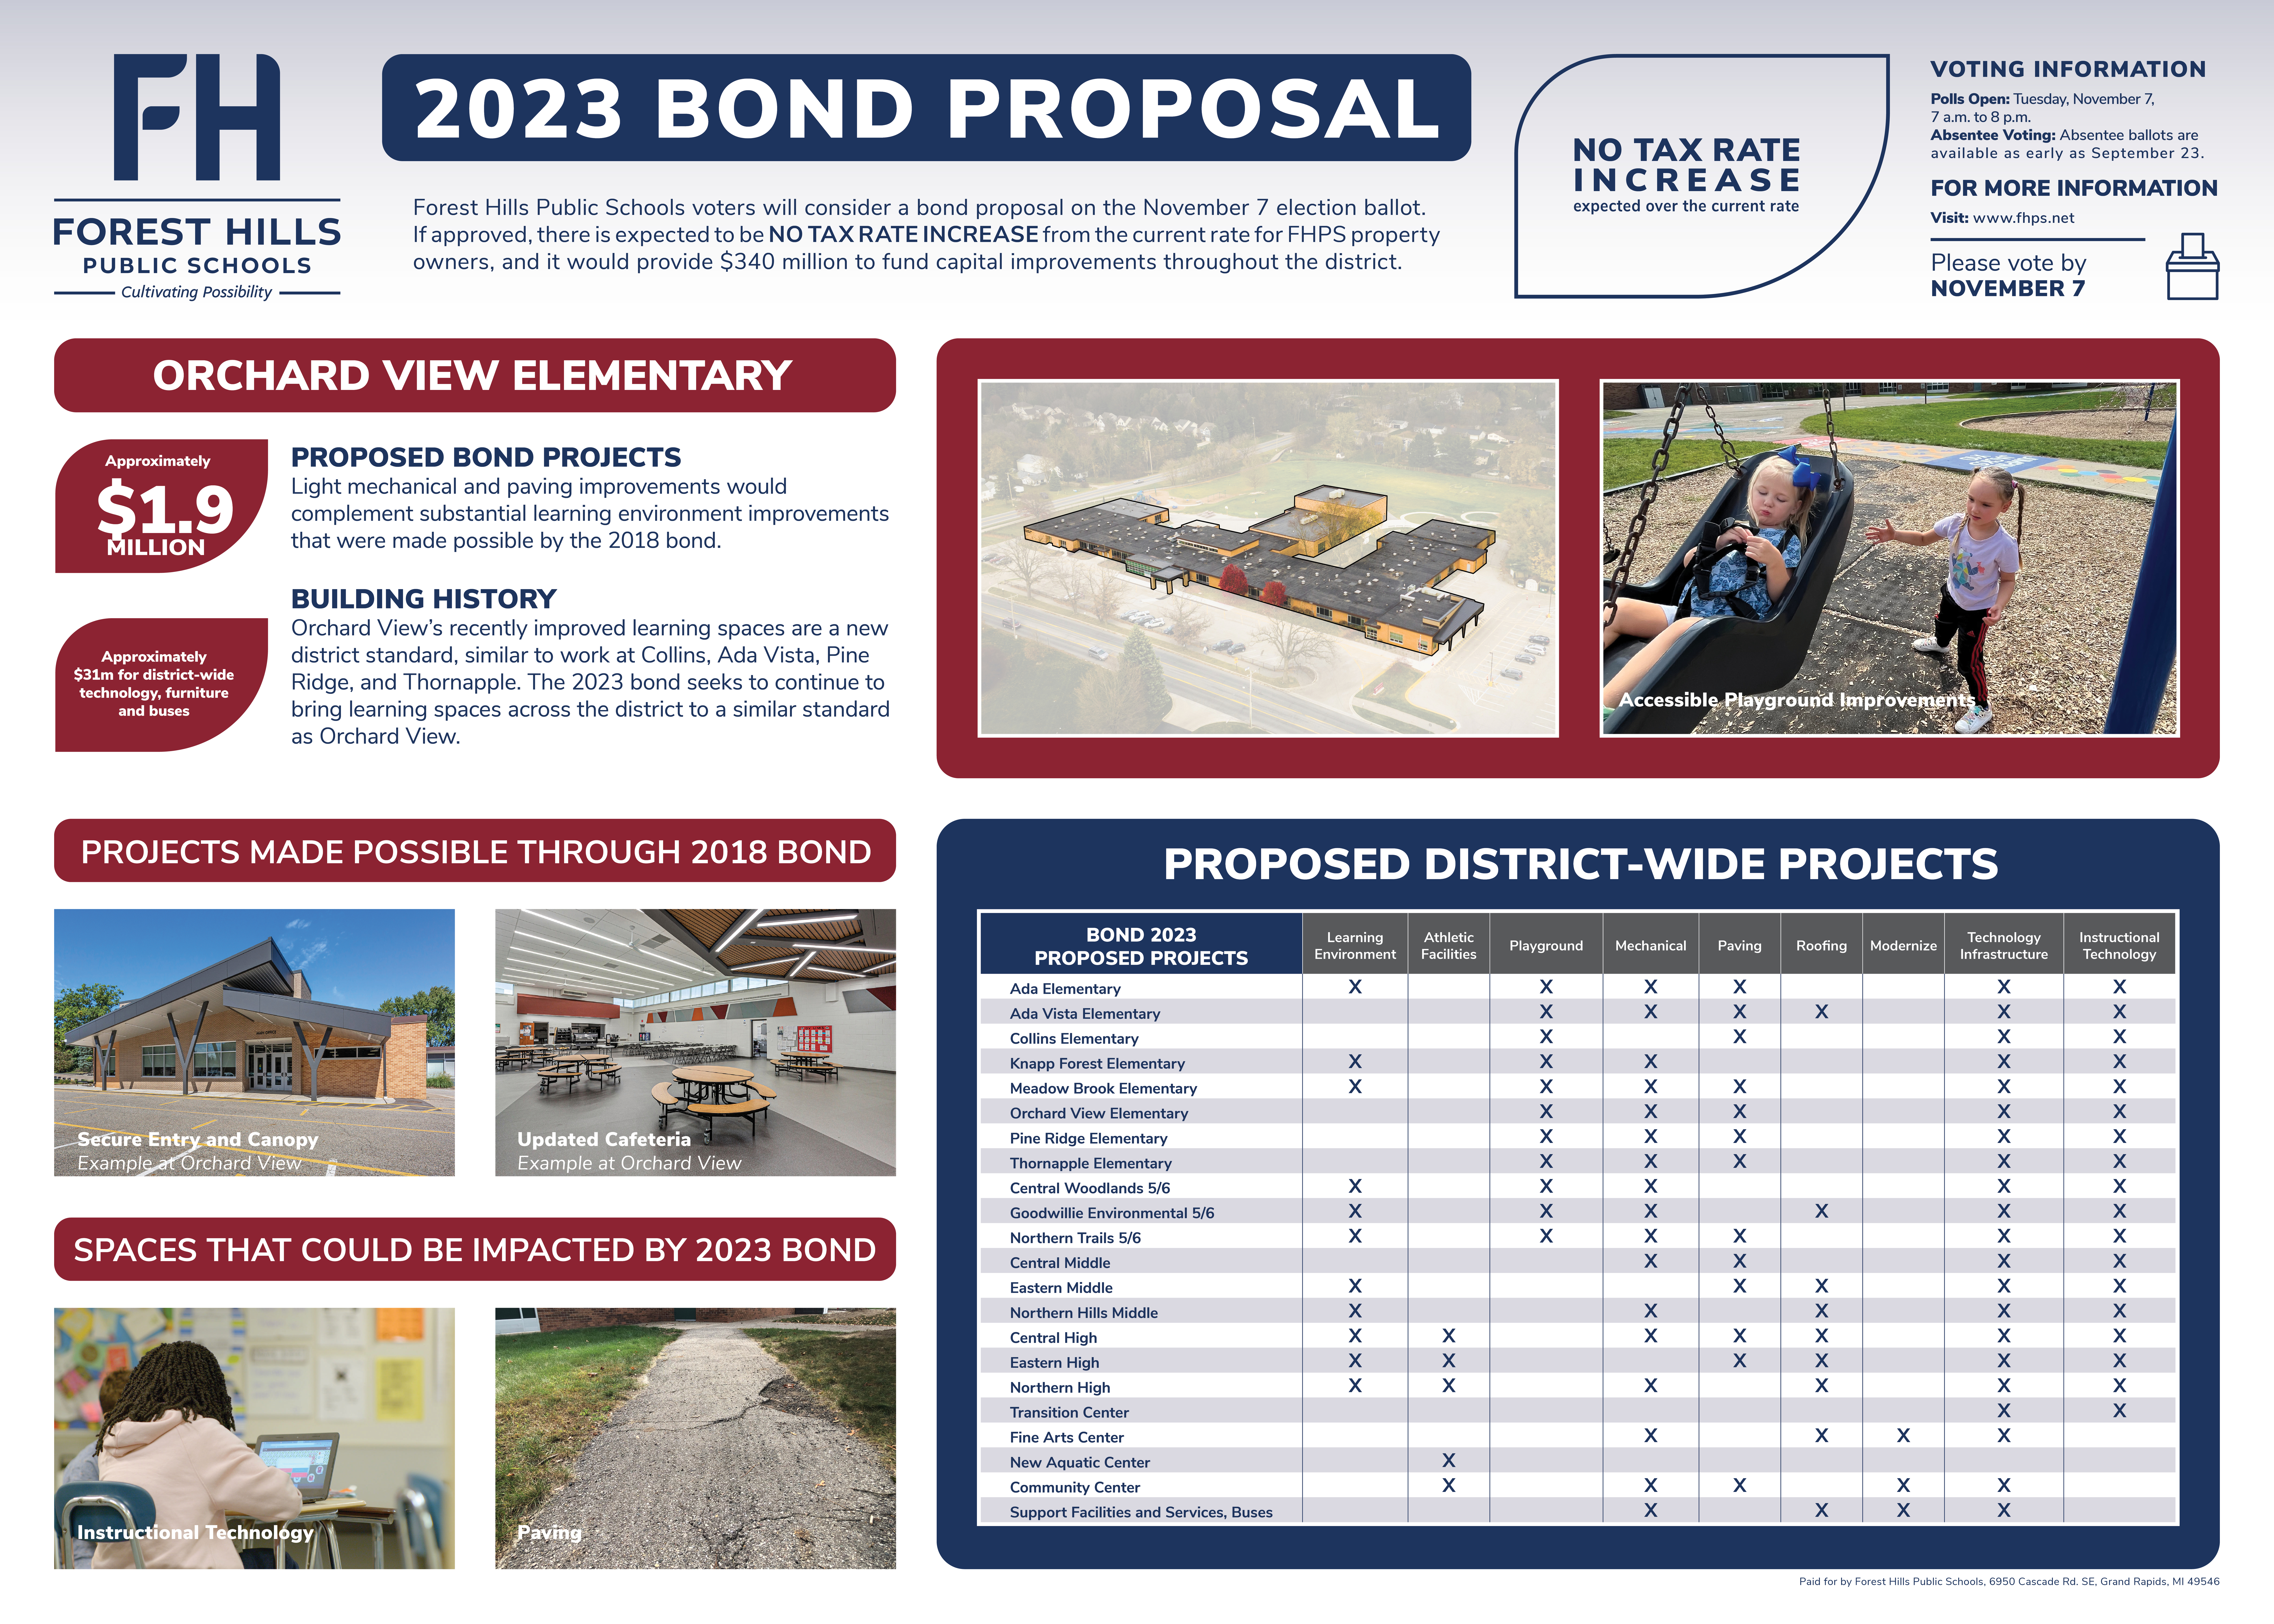 Orchard View and pictures of the existing building and bond project pictures from 2018 and spaces that could be impacted by the 2023 bond.